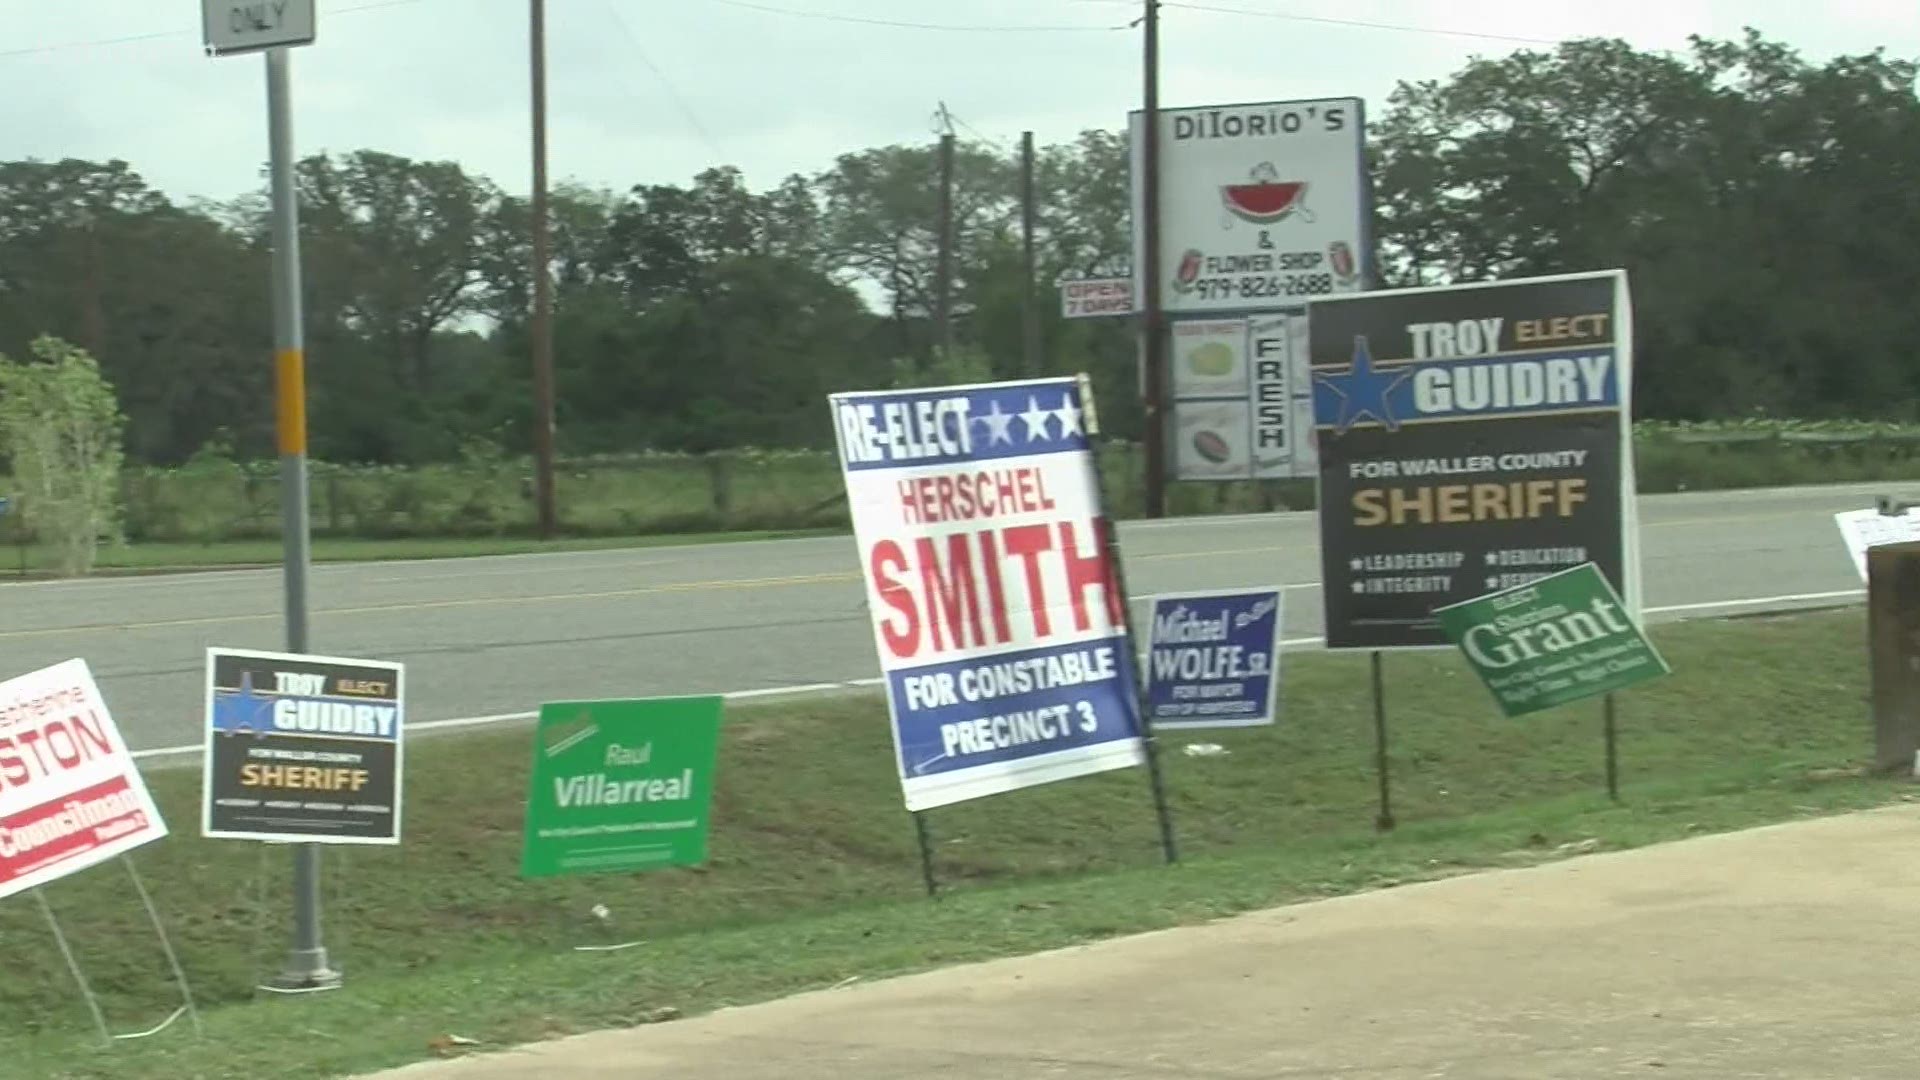 Waller County is seeing one of their highest voter turnouts in years.